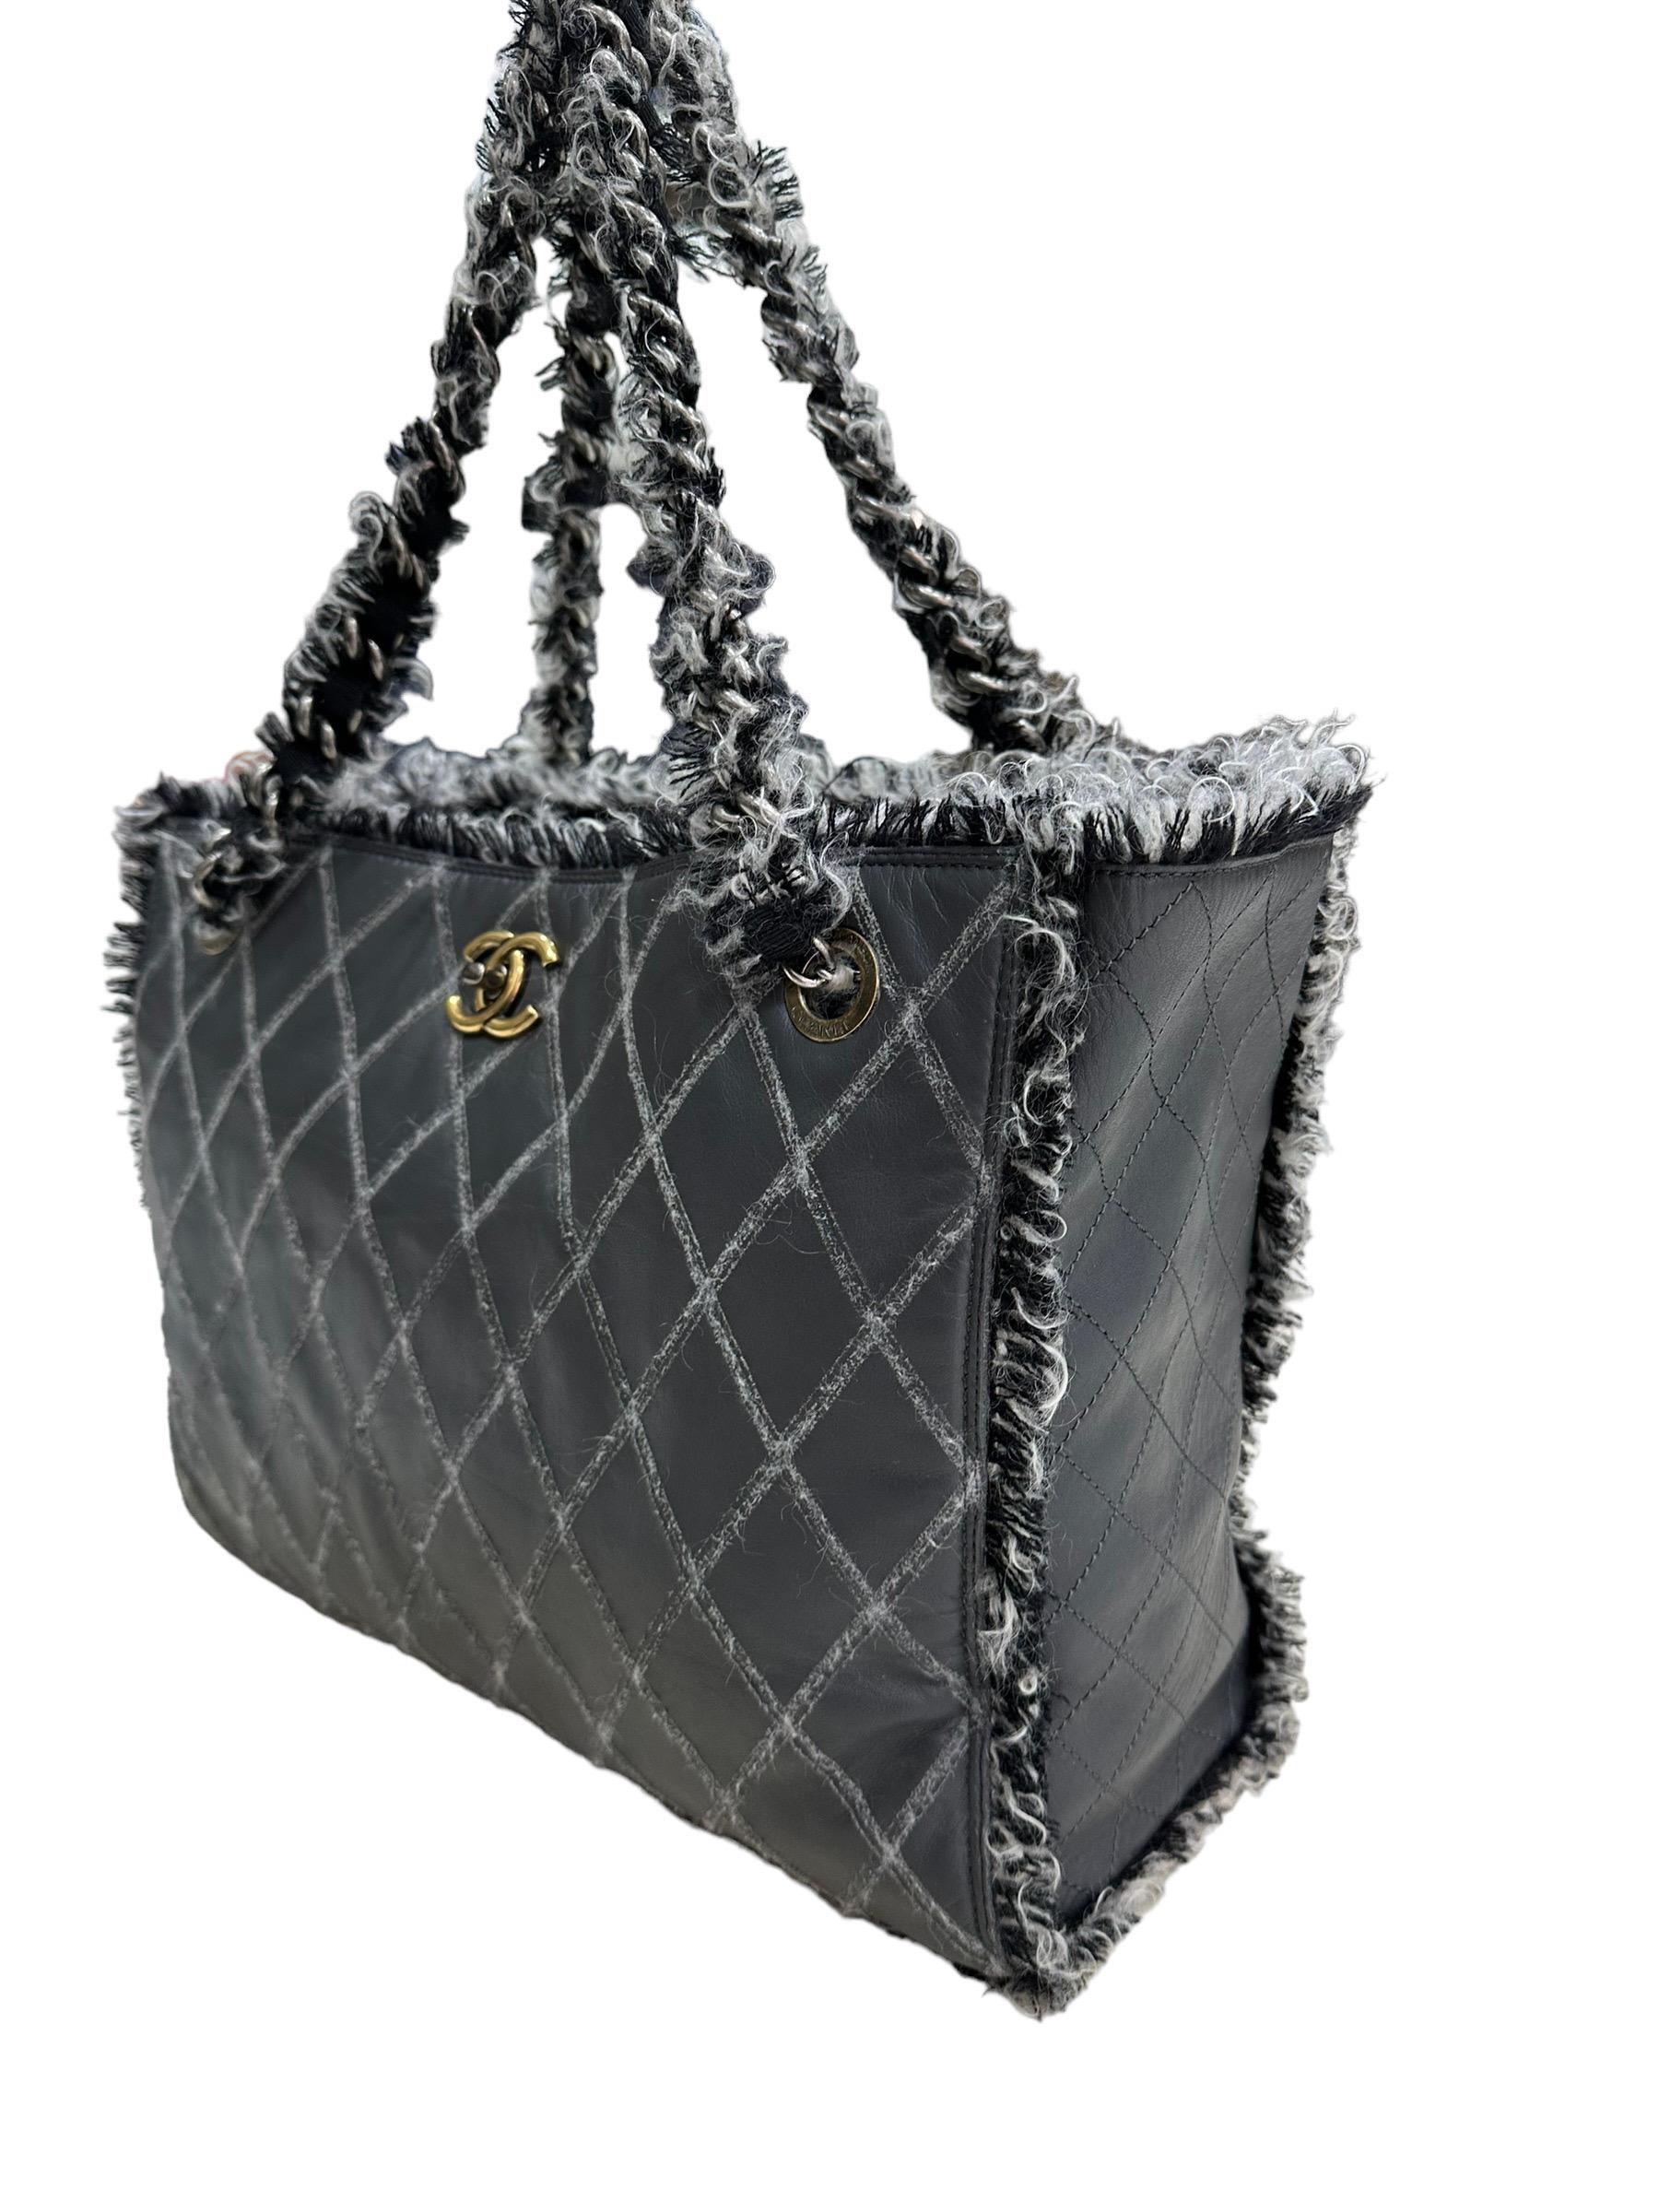 2011 Chanel Tweed Grey Tote Bag In Excellent Condition For Sale In Torre Del Greco, IT